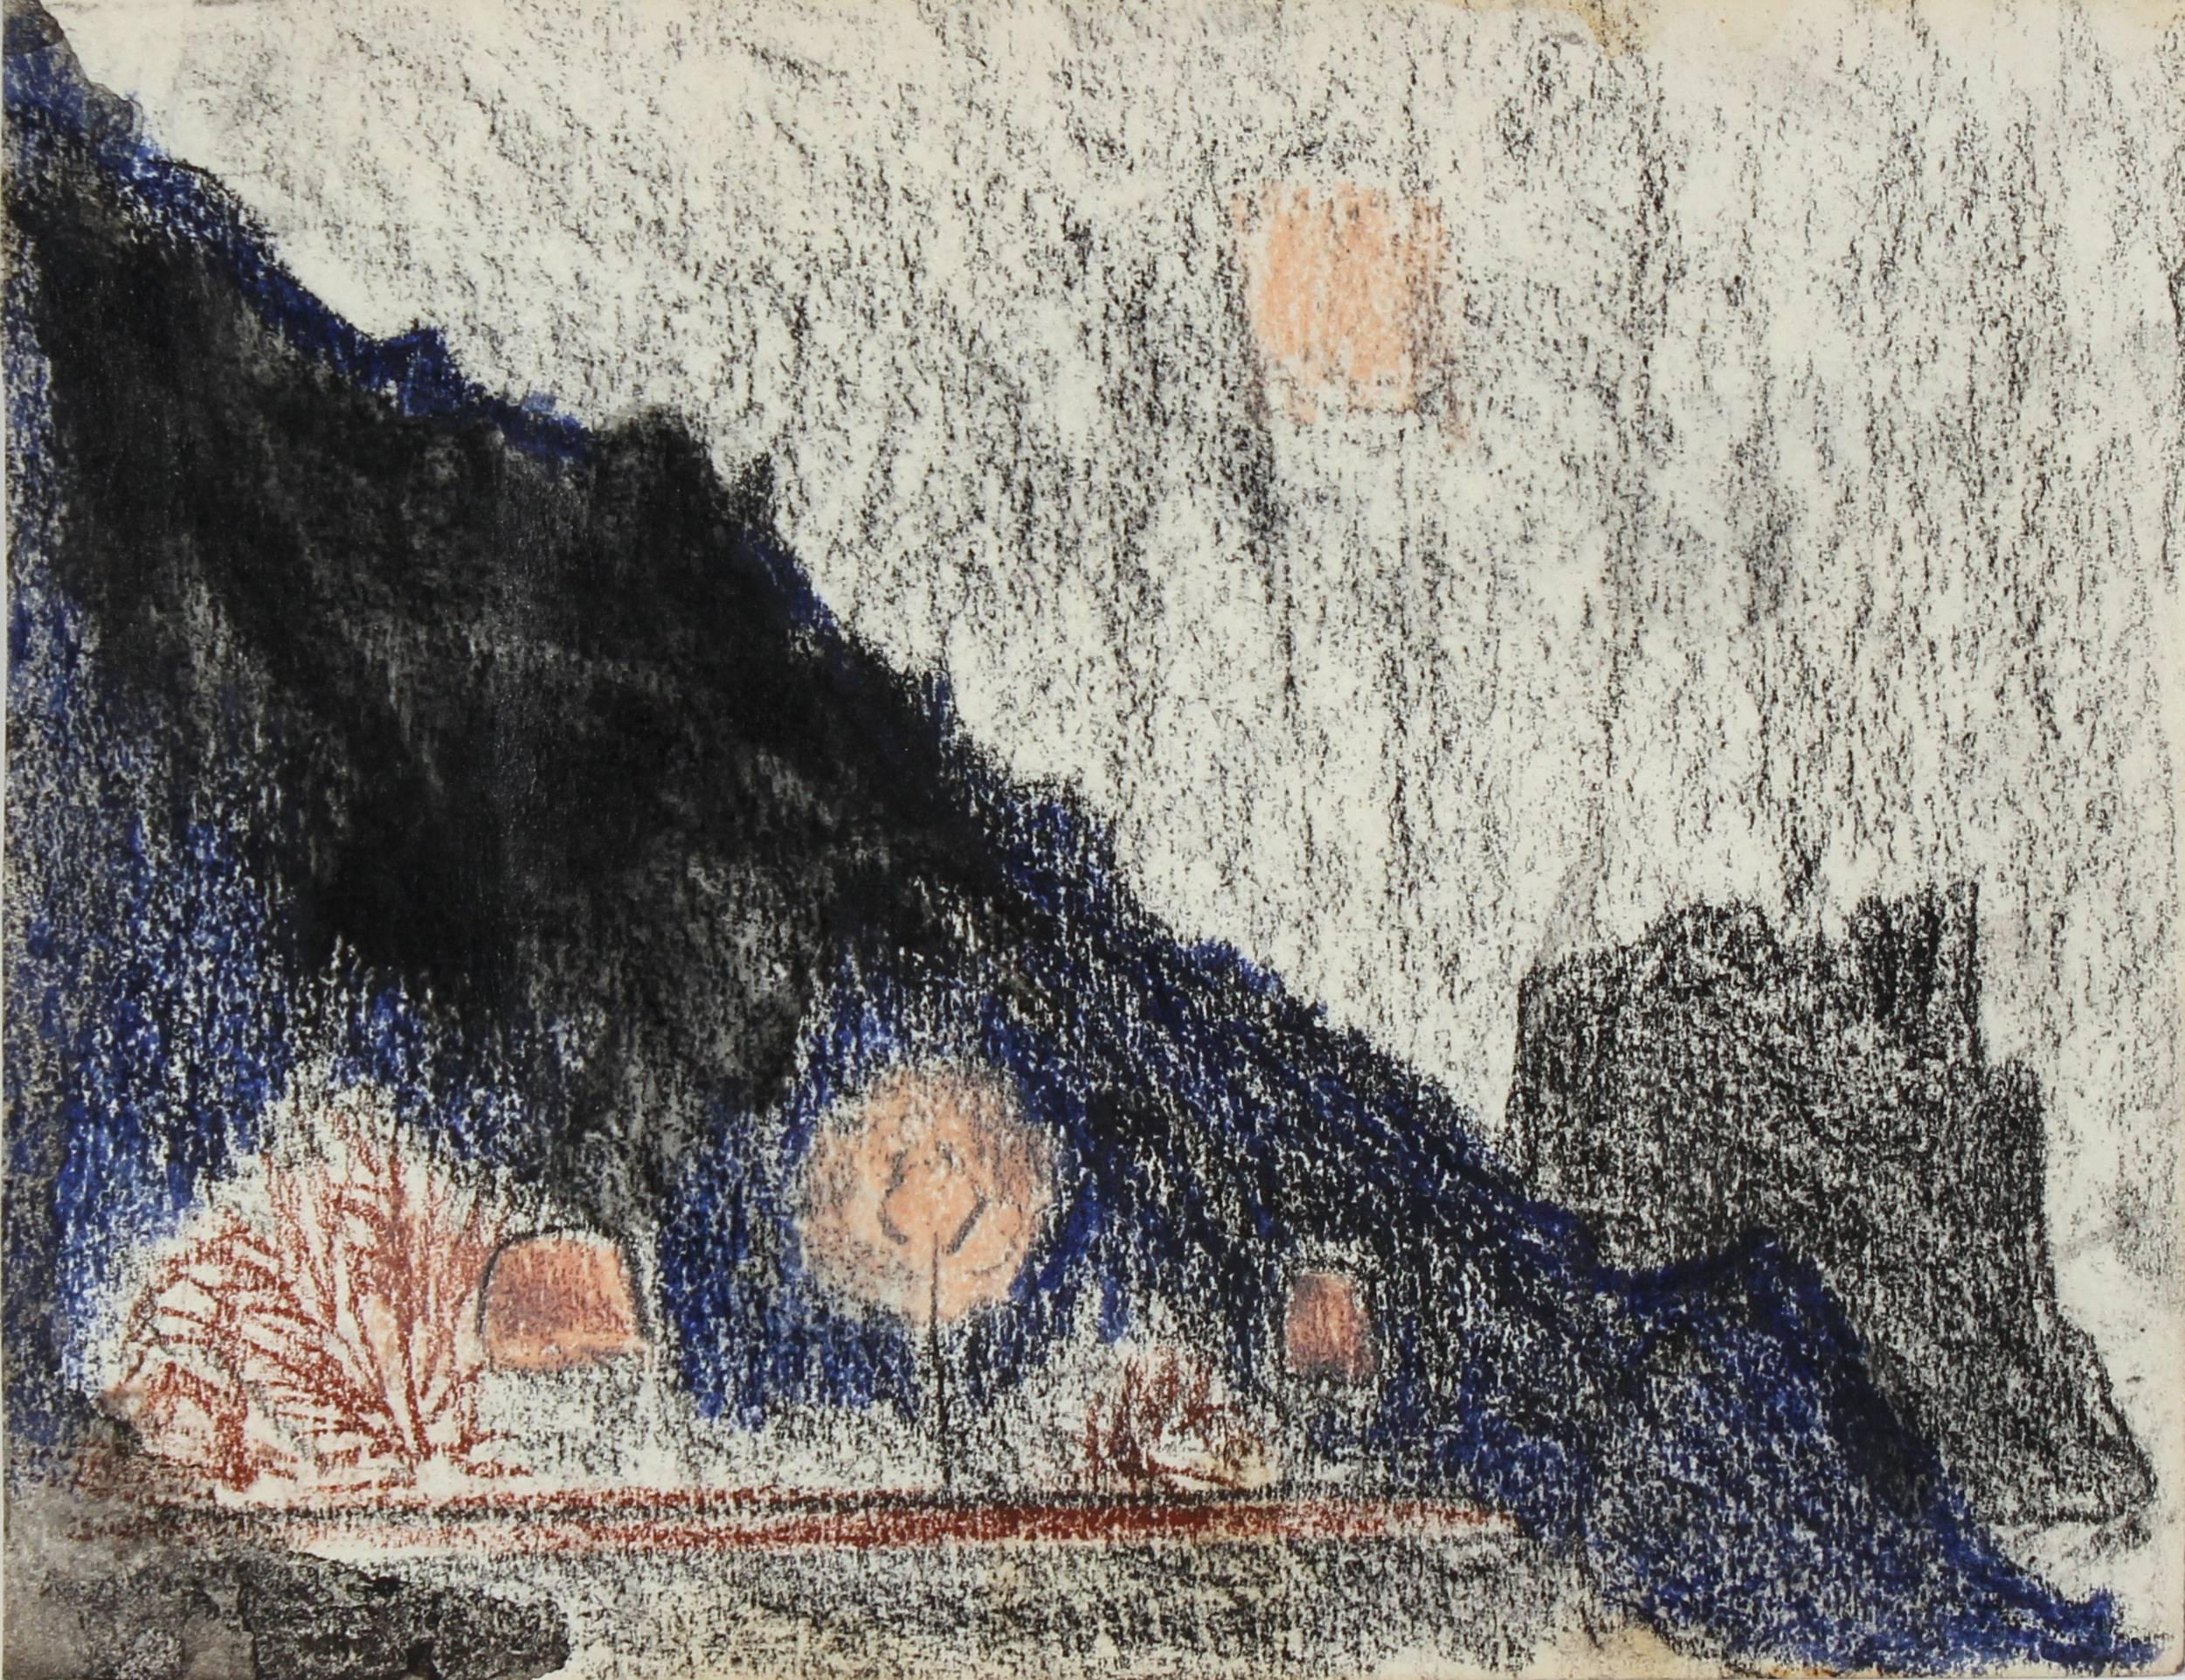 "Mexico" Nighttime Landscape in Oil Pastel with Trees and Moon in Pink, 1975